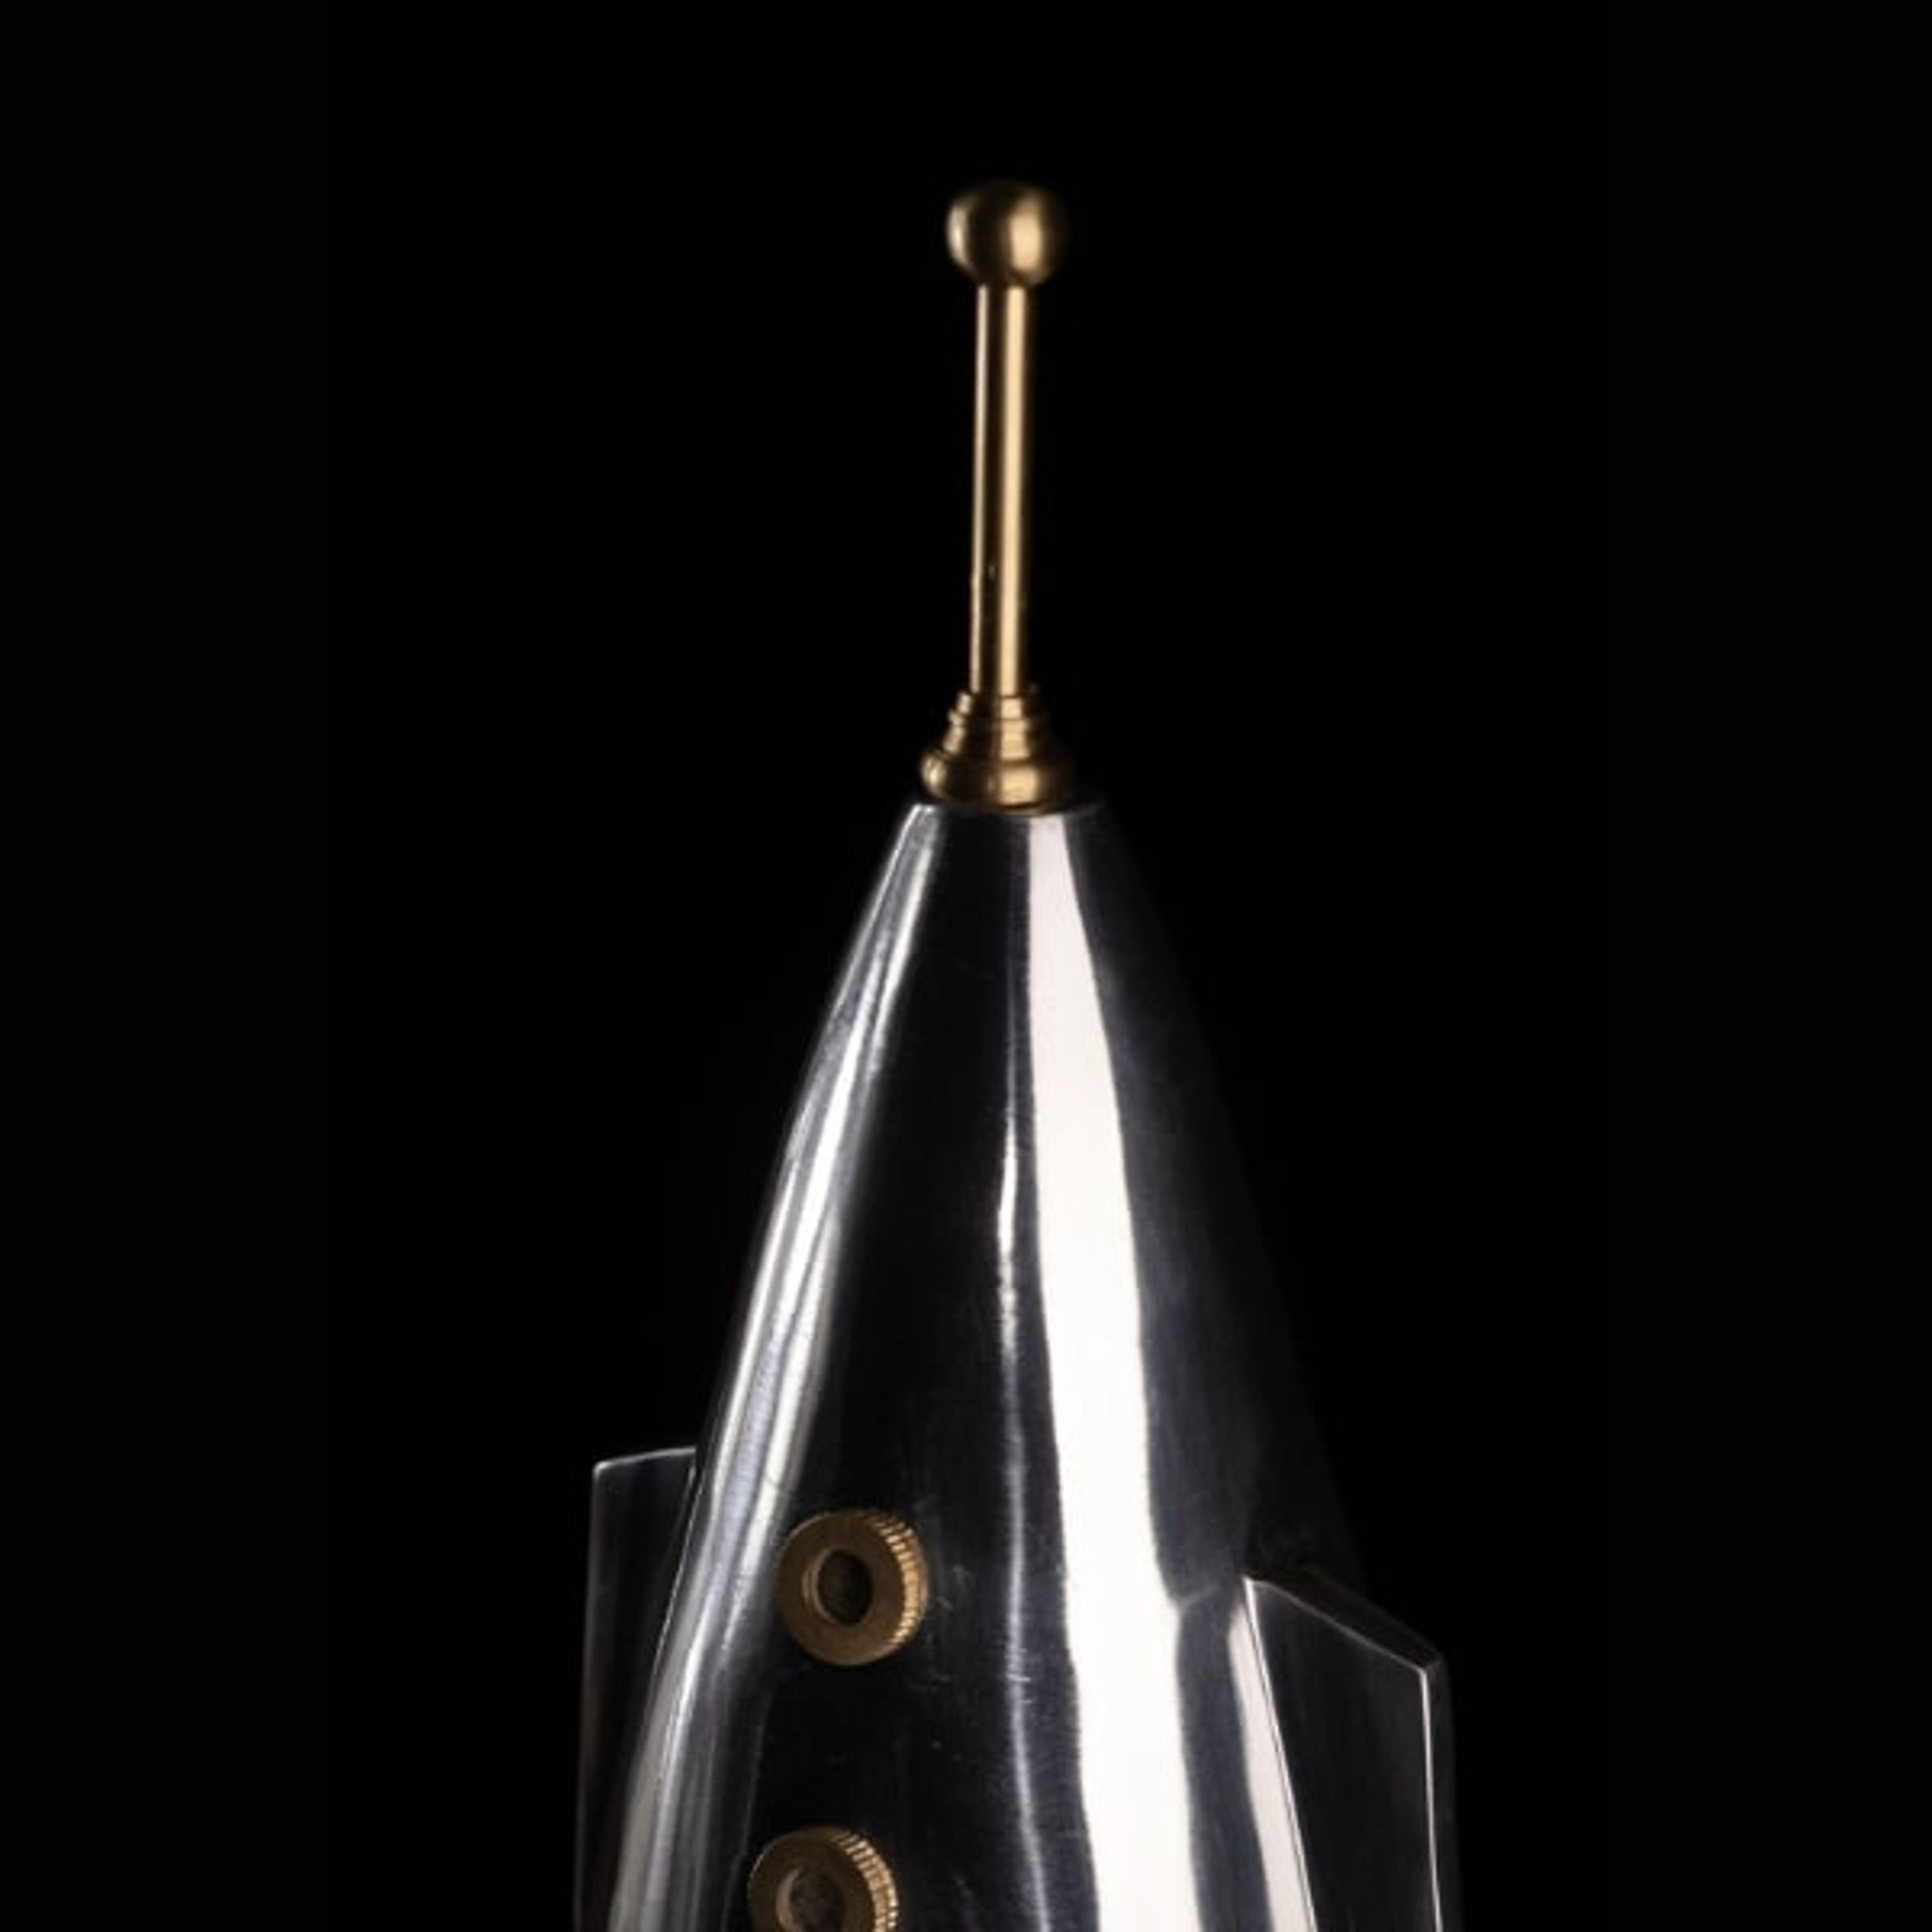 An icon from the birth of the space age, This Space X Rocket Clock houses a retro 1950s dial and hand amidst sleek lines of polished aluminum and brass. An homage to SPACE X FALCON 9 for its 87 launches completed. This retro futuristic display